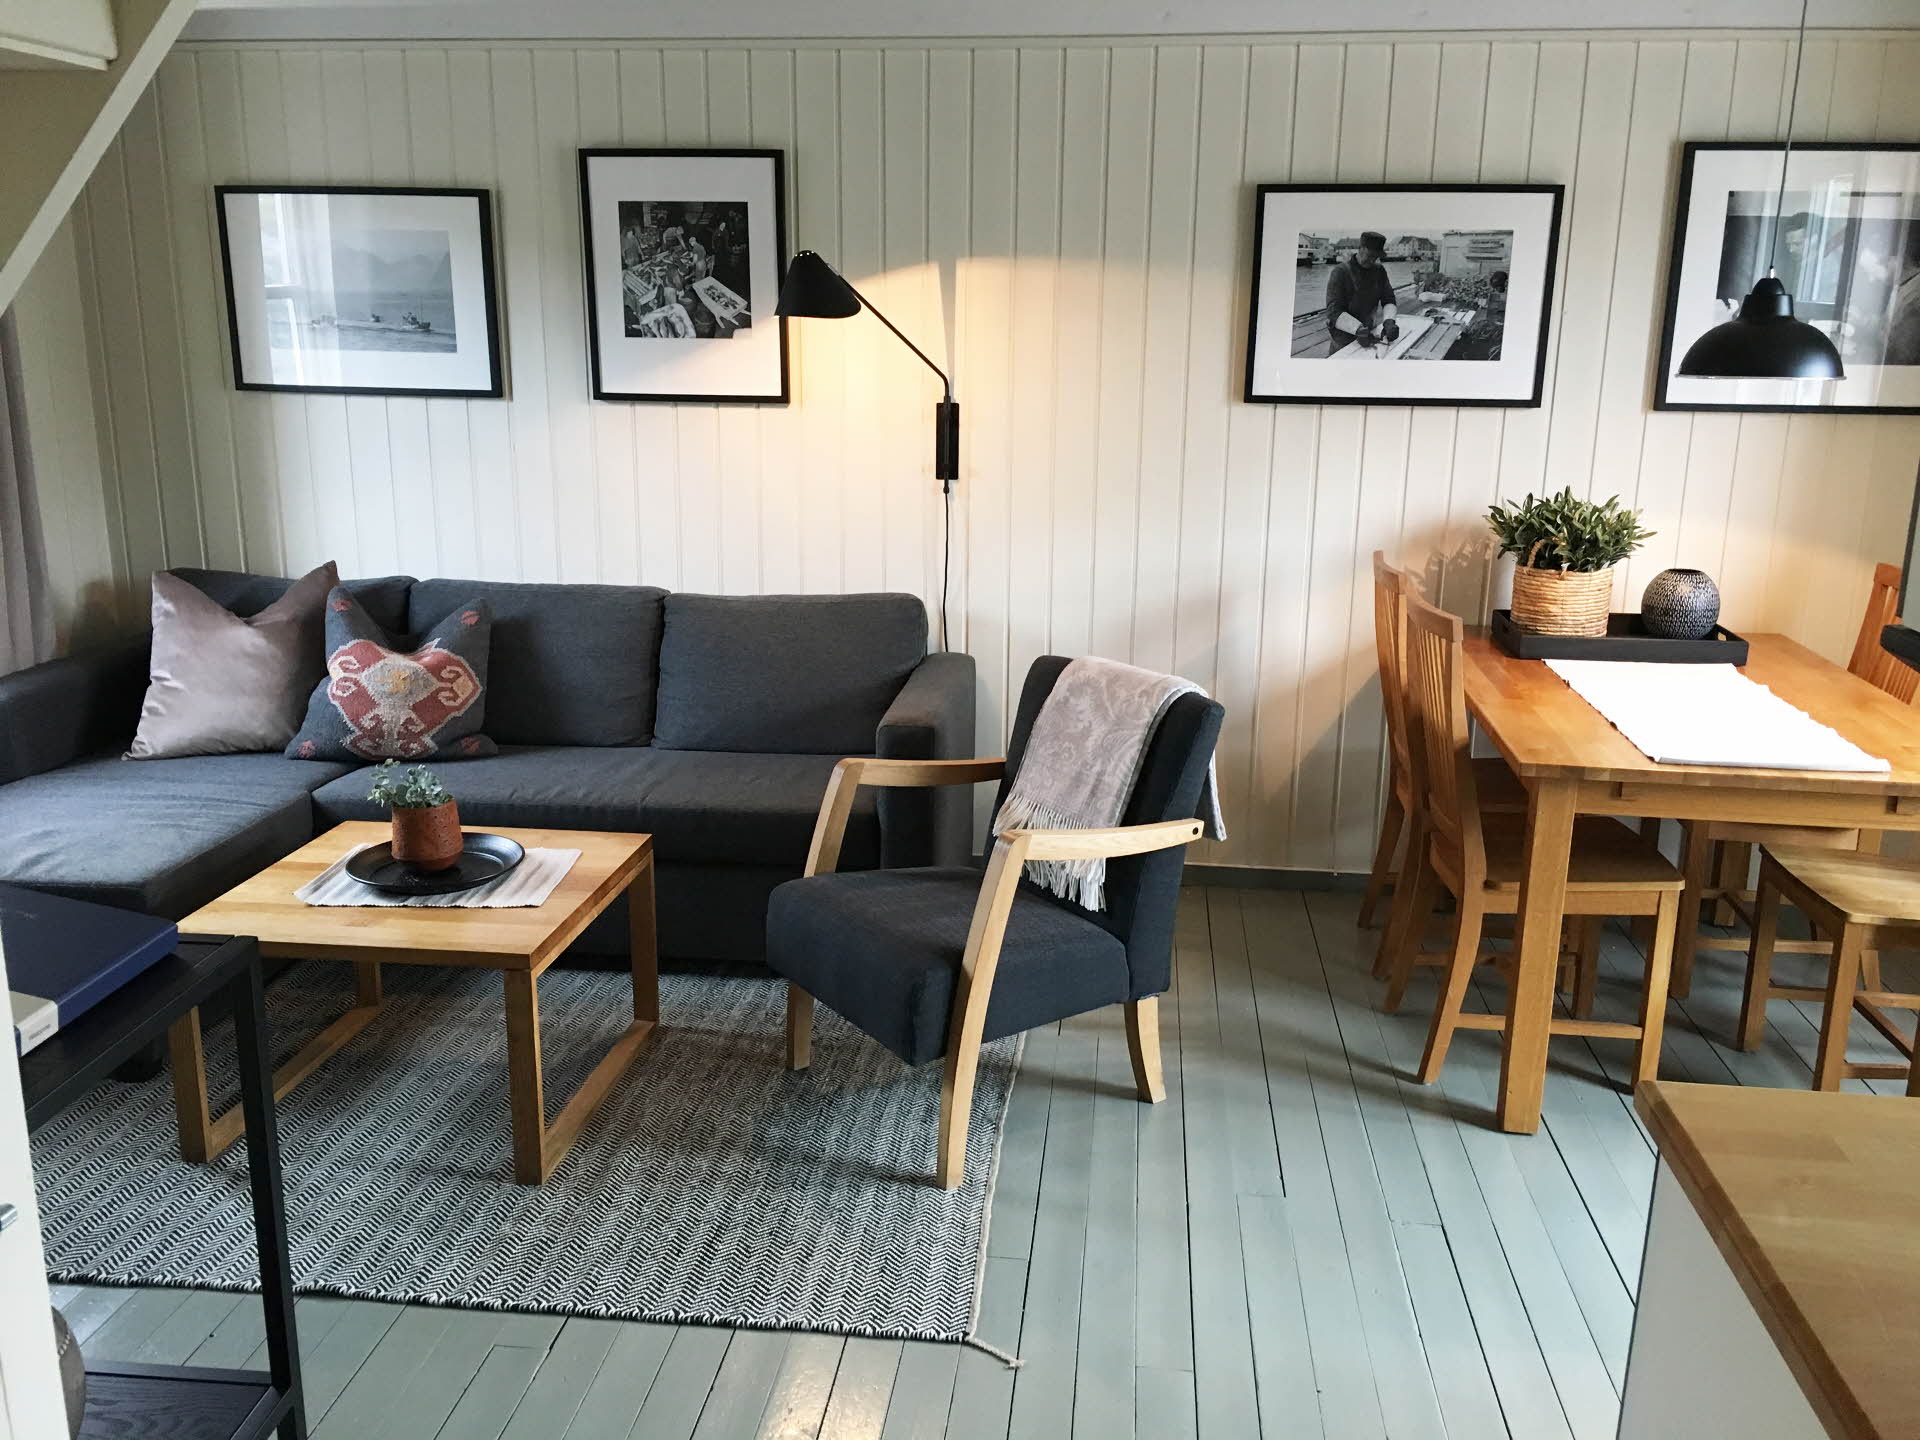 Interior of a rorbu at Nyvågar, with sofa suite and dining table.